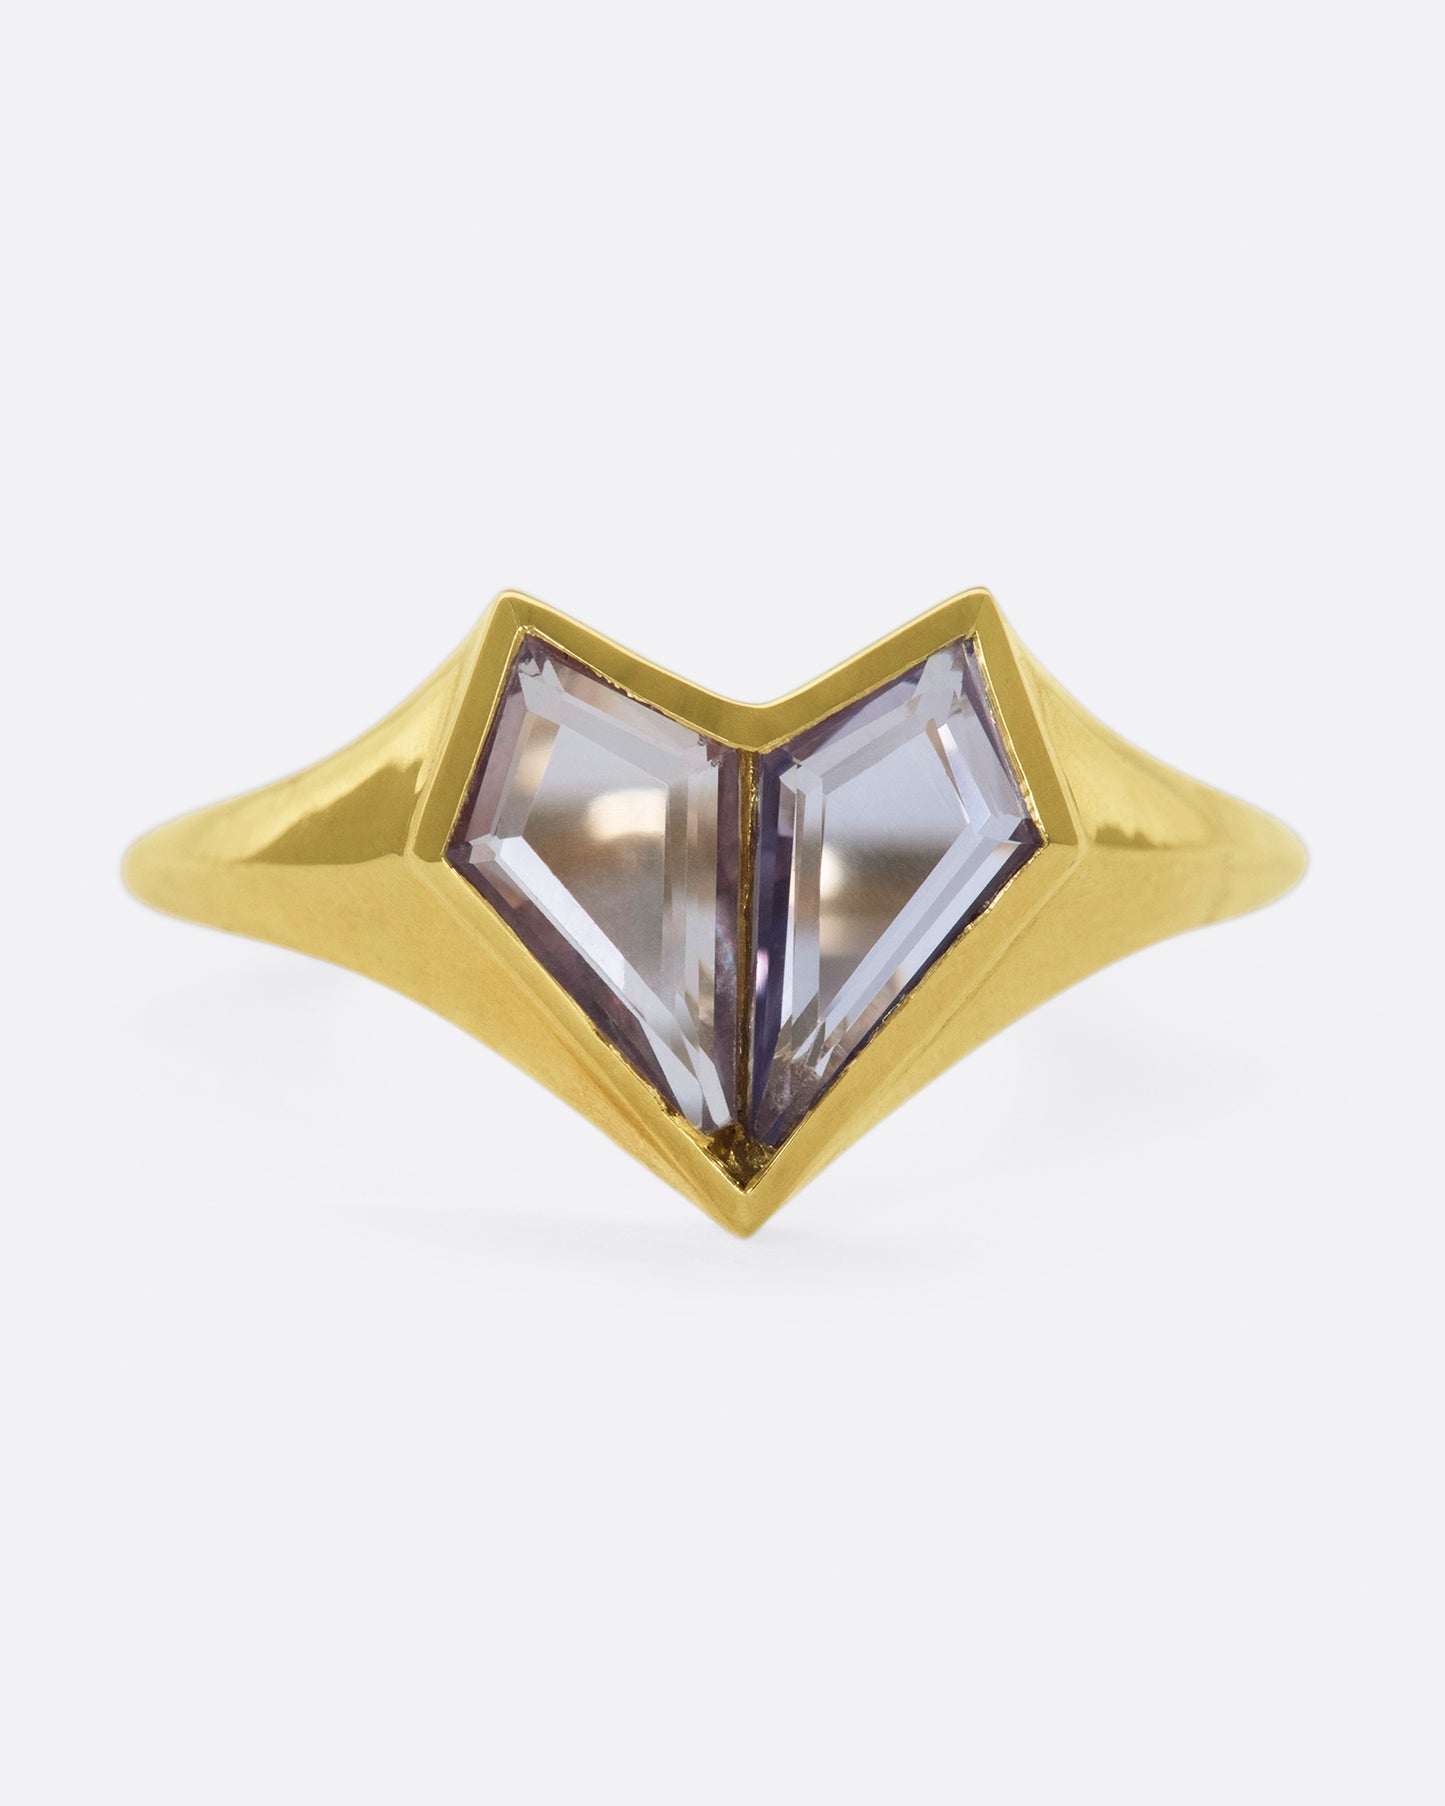 Two kite shaped sapphires; one pale pink and one purple; come together to form a heart on this signet ring.